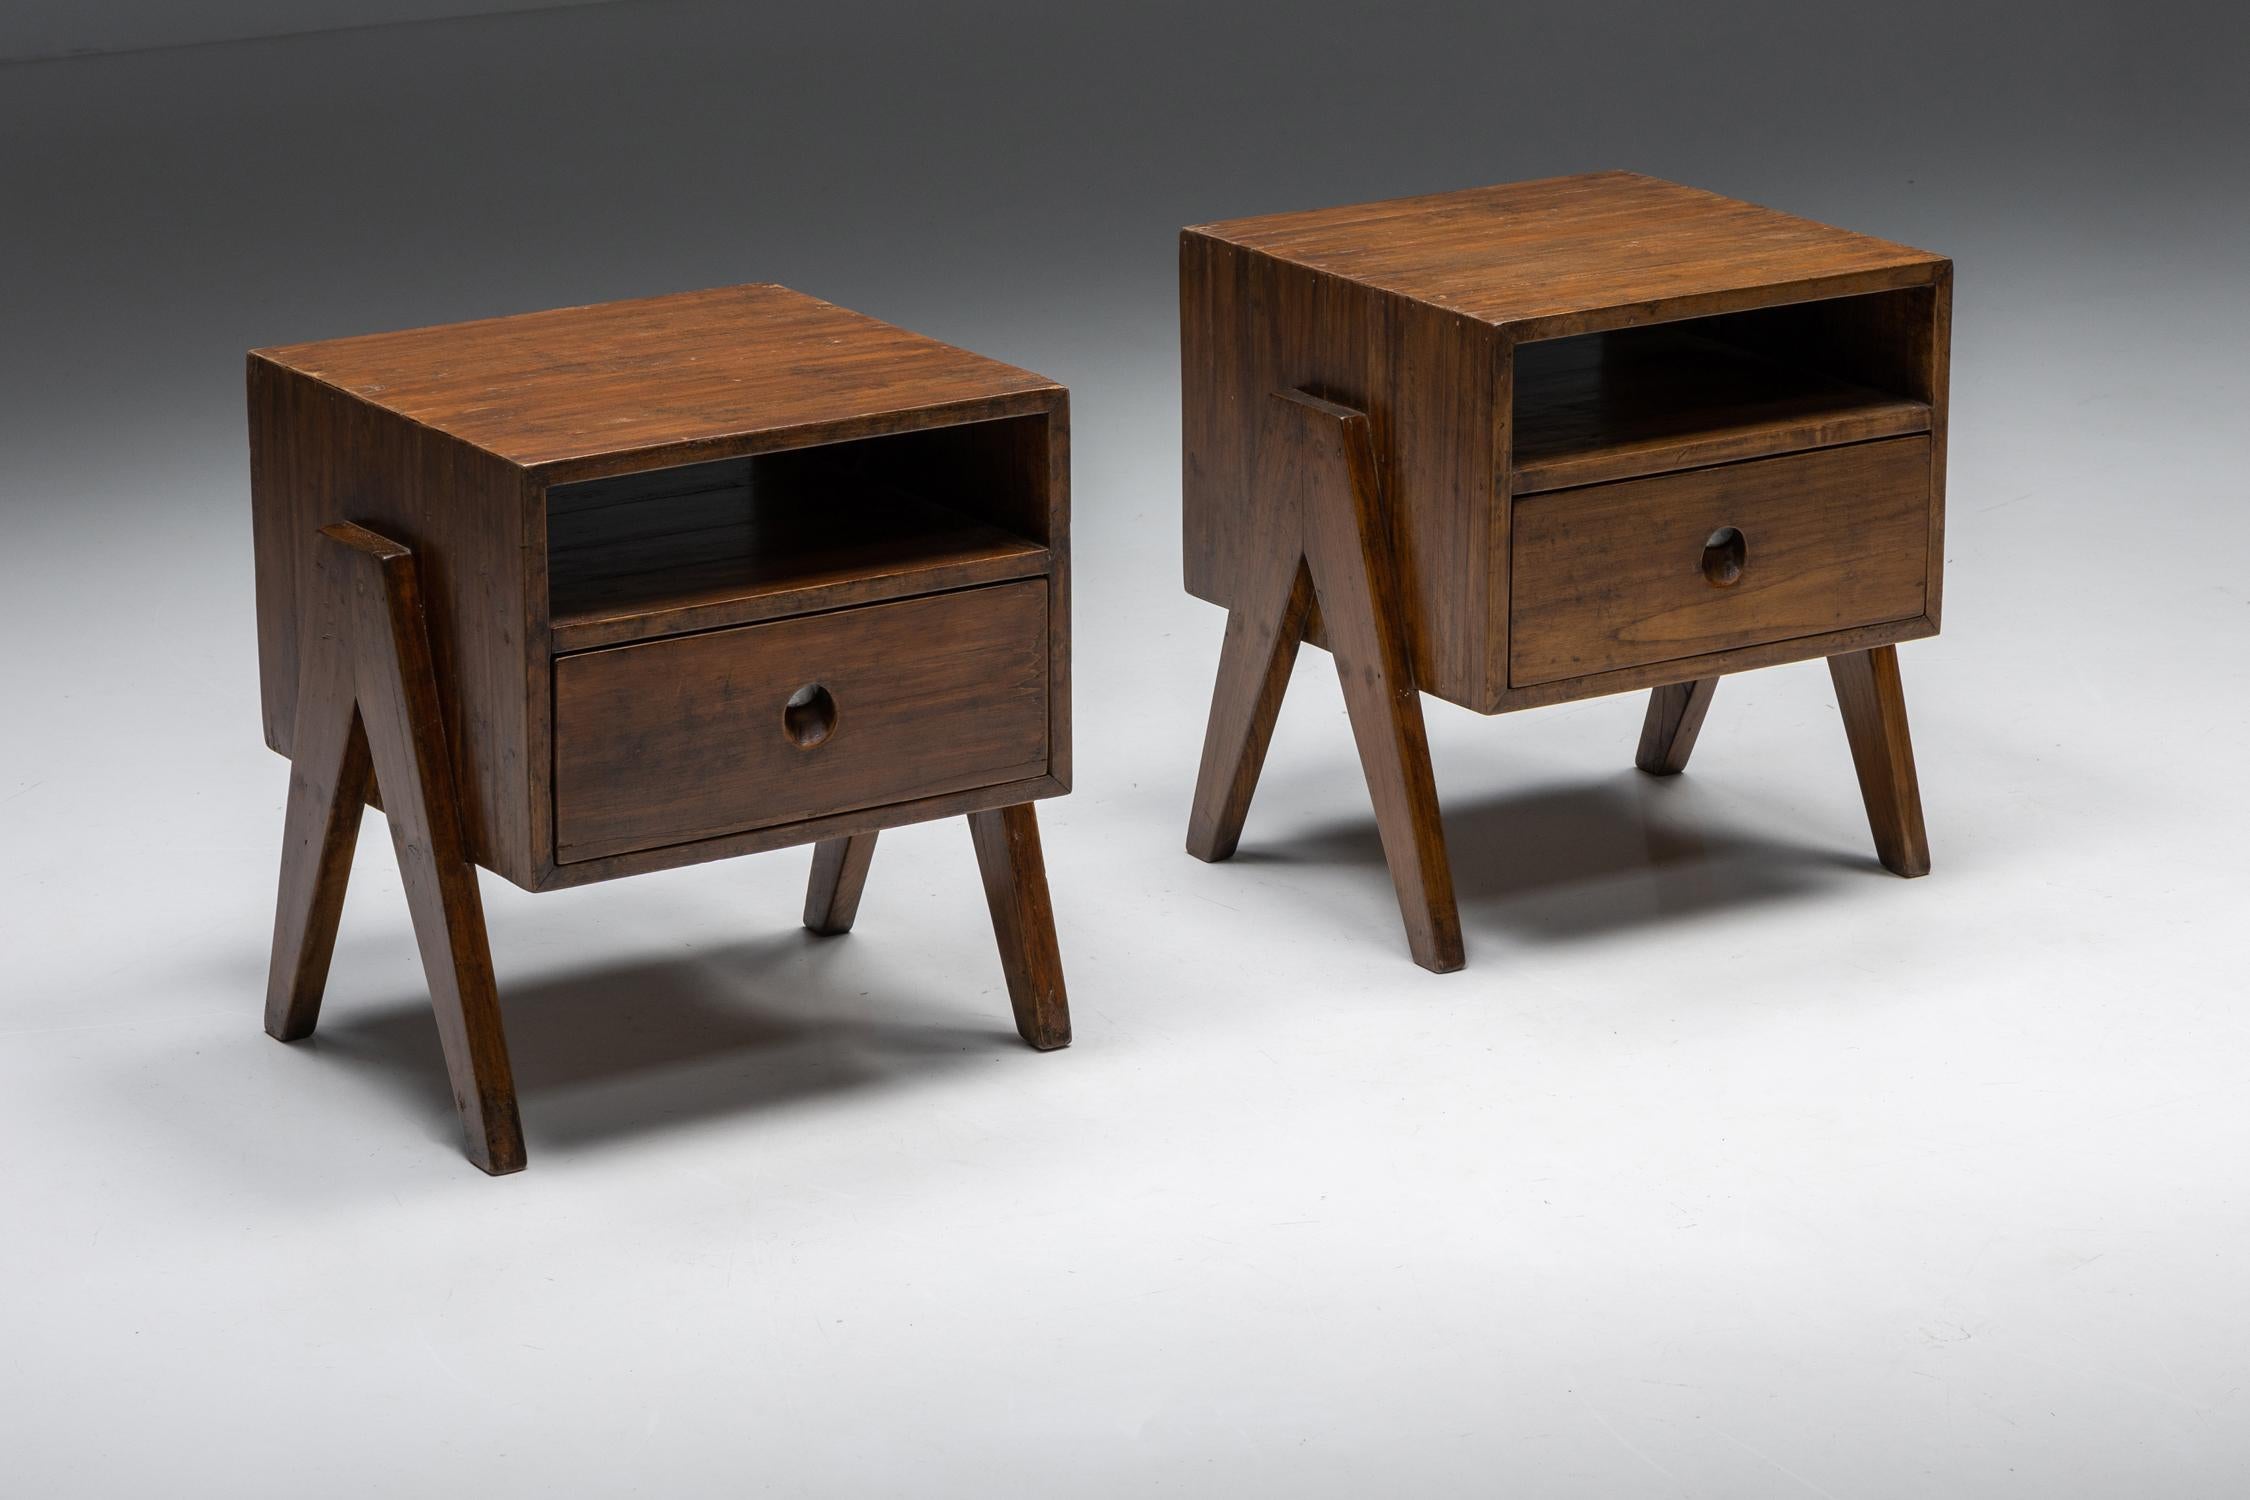 Pierre Jeanneret, Solid Teak Bedside Table, Chandigarh, Le Corbusier, 1955

These bedside tables, designed by Pierre Jeanneret, are made of solid teak. The quadrangular body consists of an open compartment at the top, and a single drawer at the